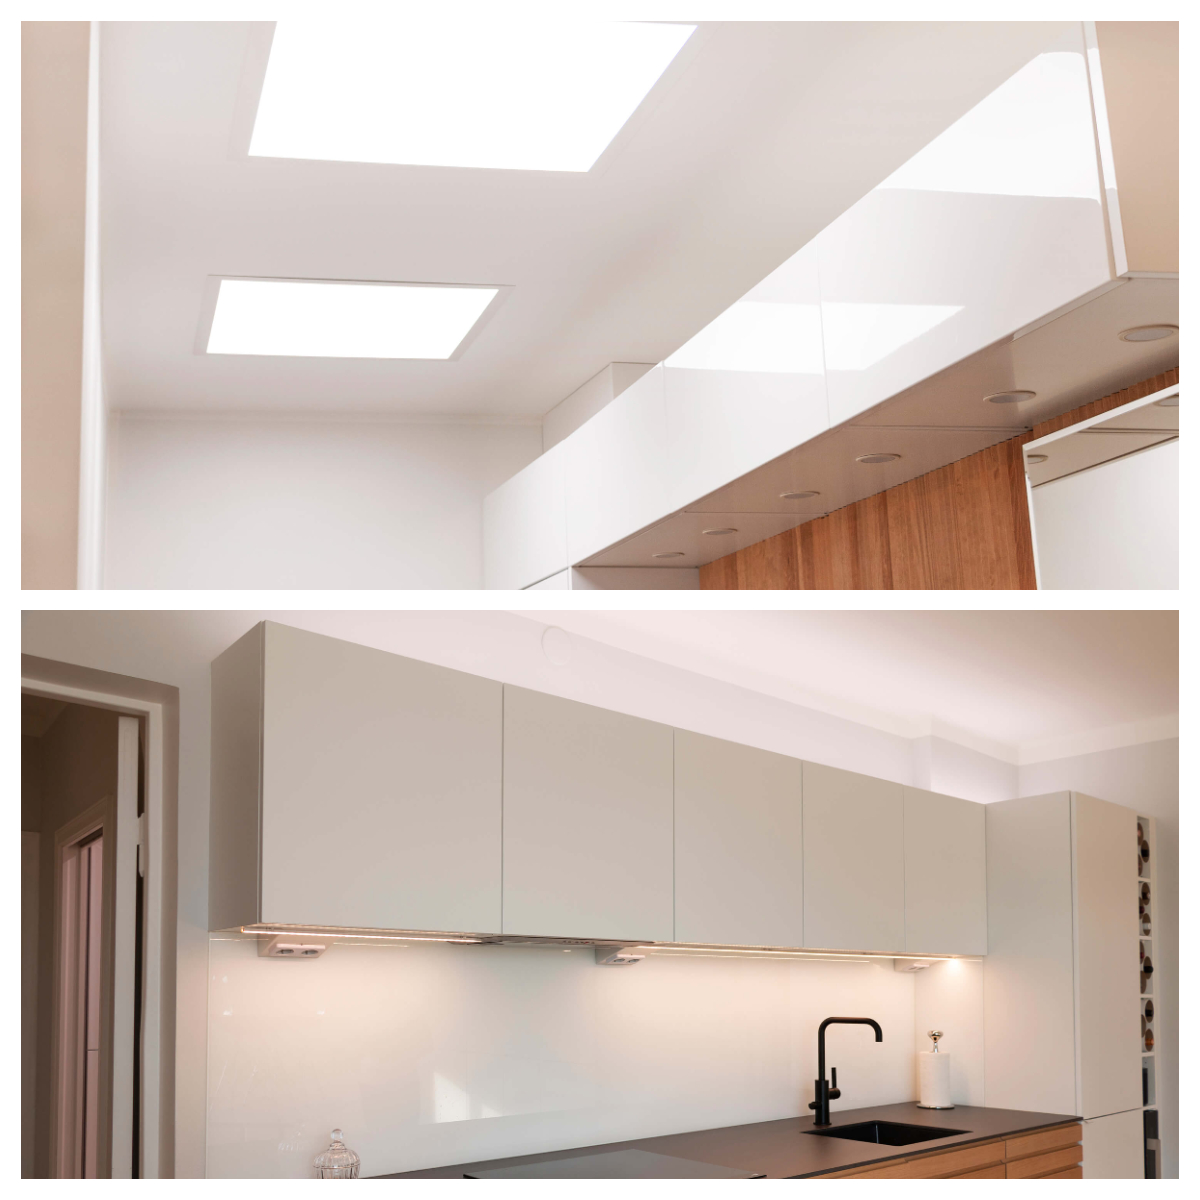 LedStore's Panel 600 in the hallway and the CCT colour temperature adjustable LED strip in the kitchen are both Zigbee-controlled for mobile use and controlled by a wall button and remote control.